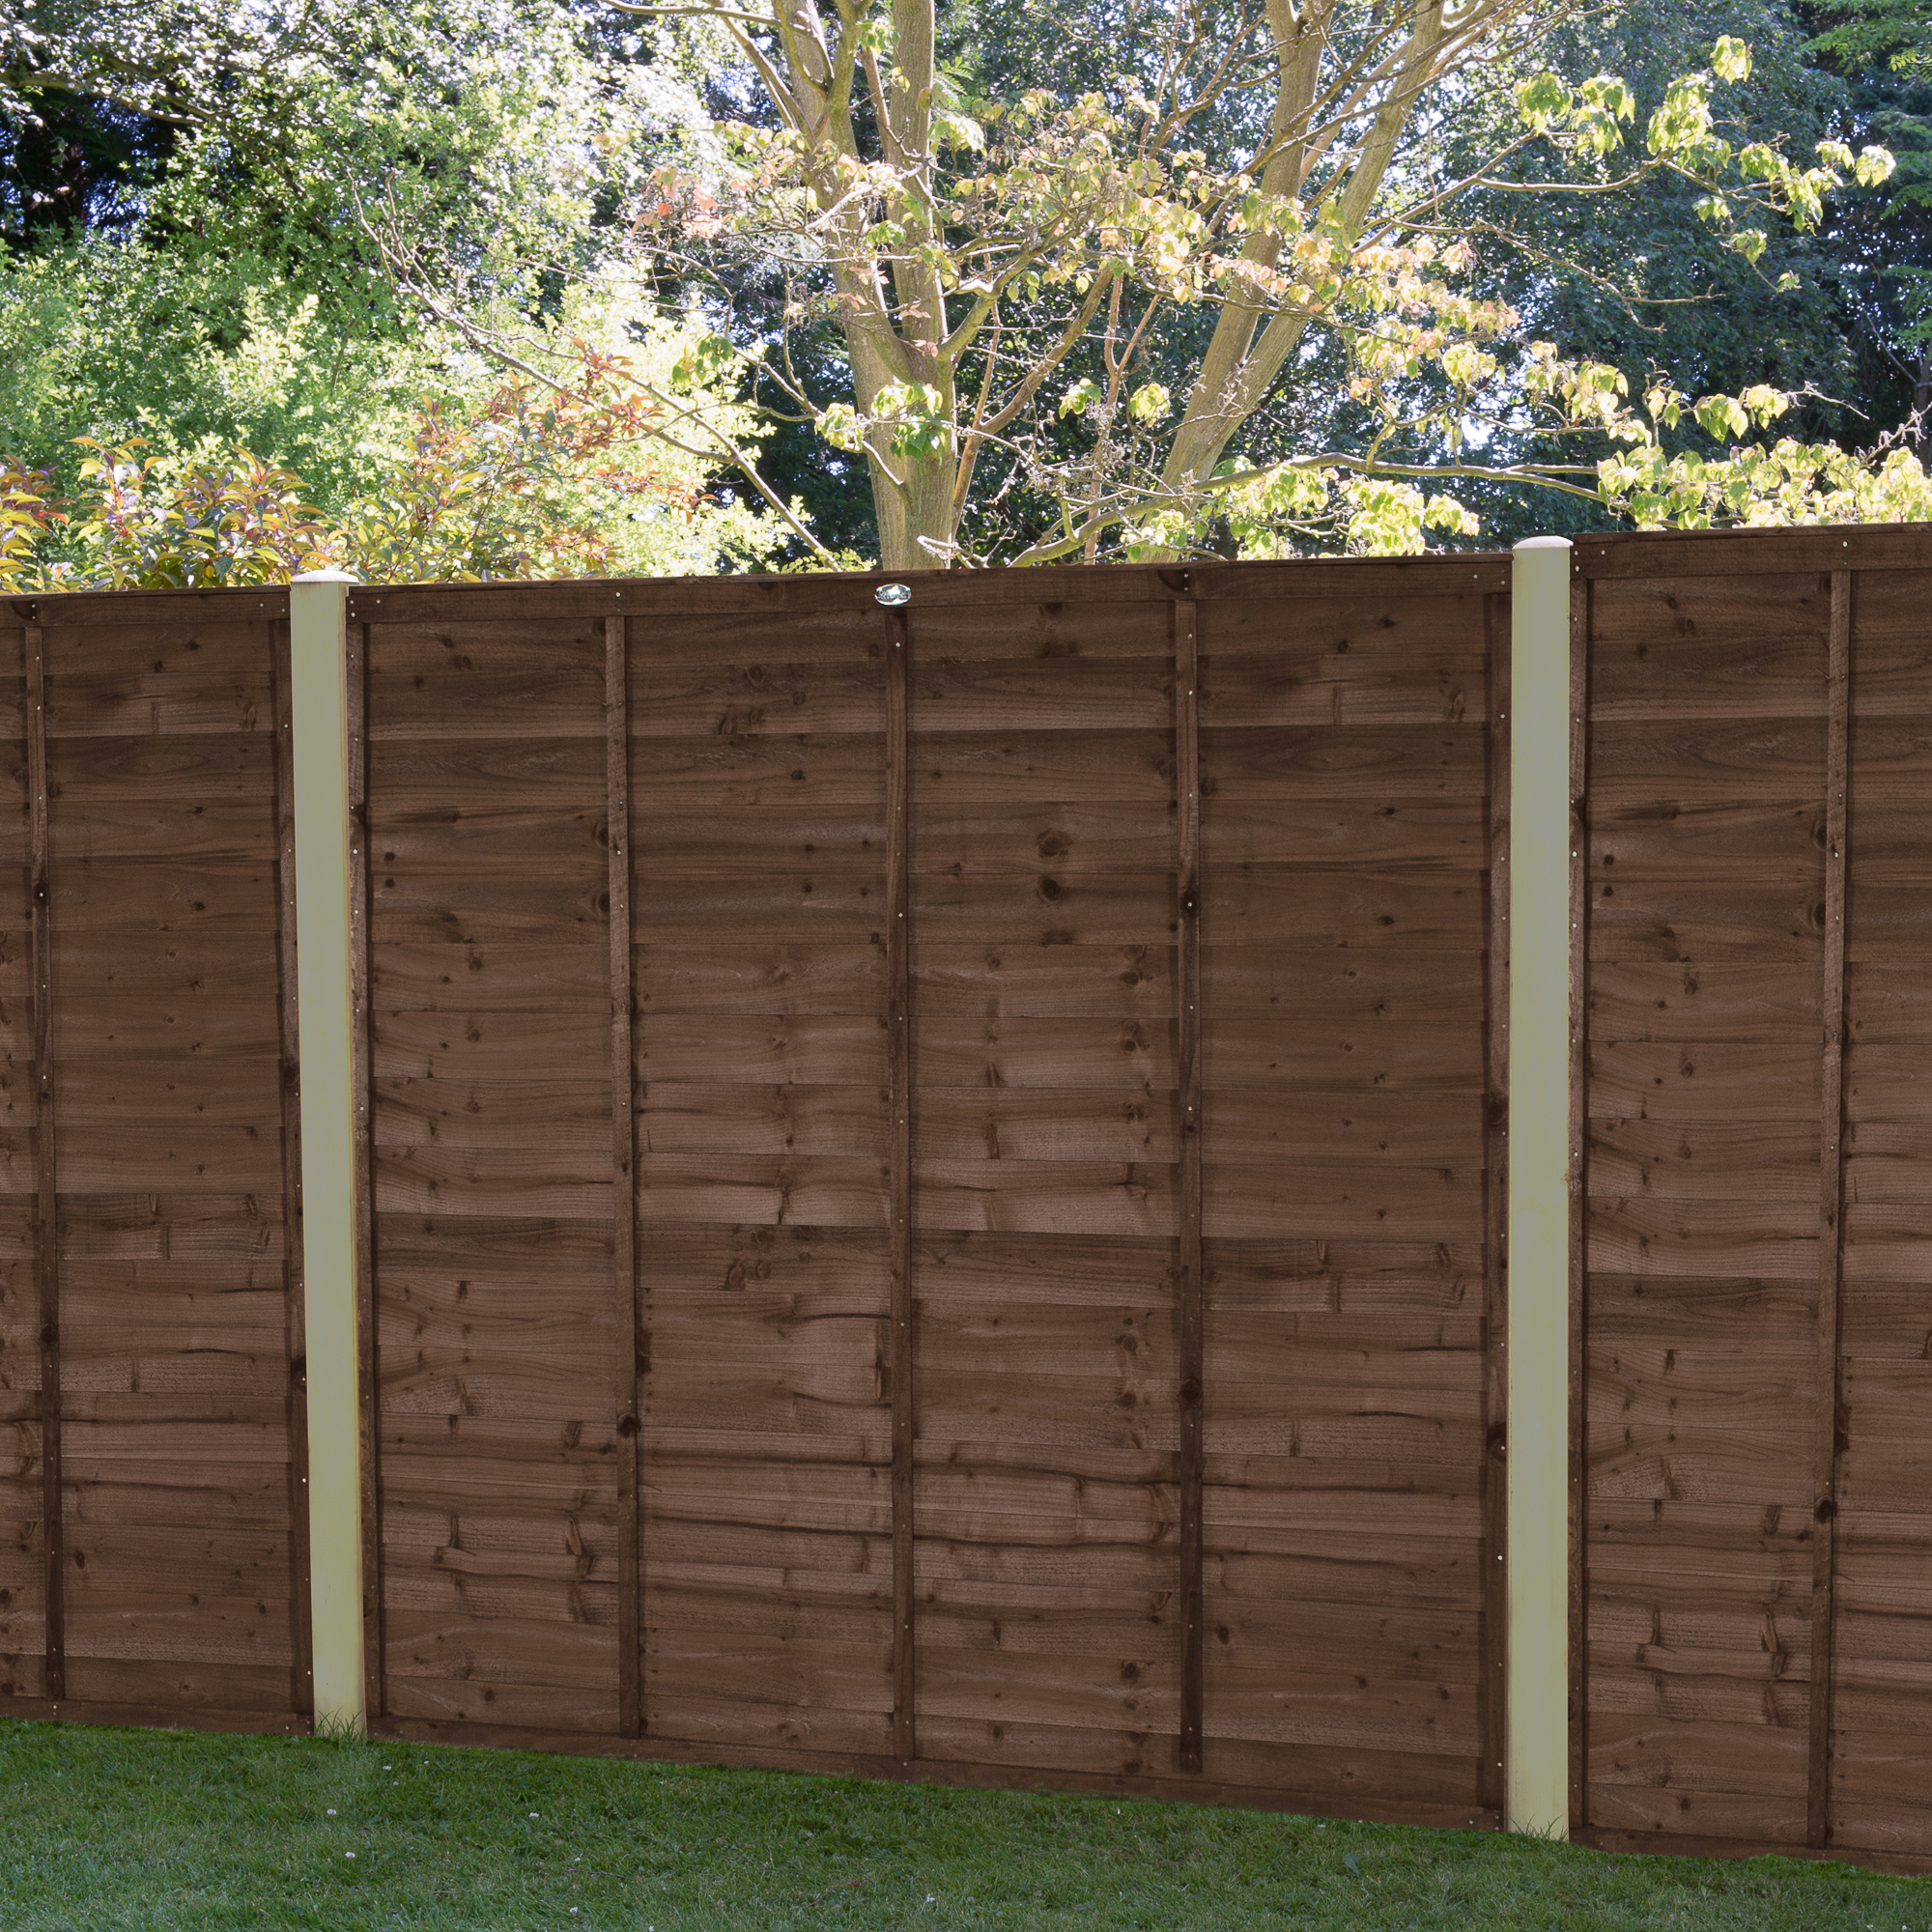 Image of Forest Garden Brown Pressure Treated Superlap Fence Panel - 1830 x 1680mm - 6 x 5'6ft - Pack of 3